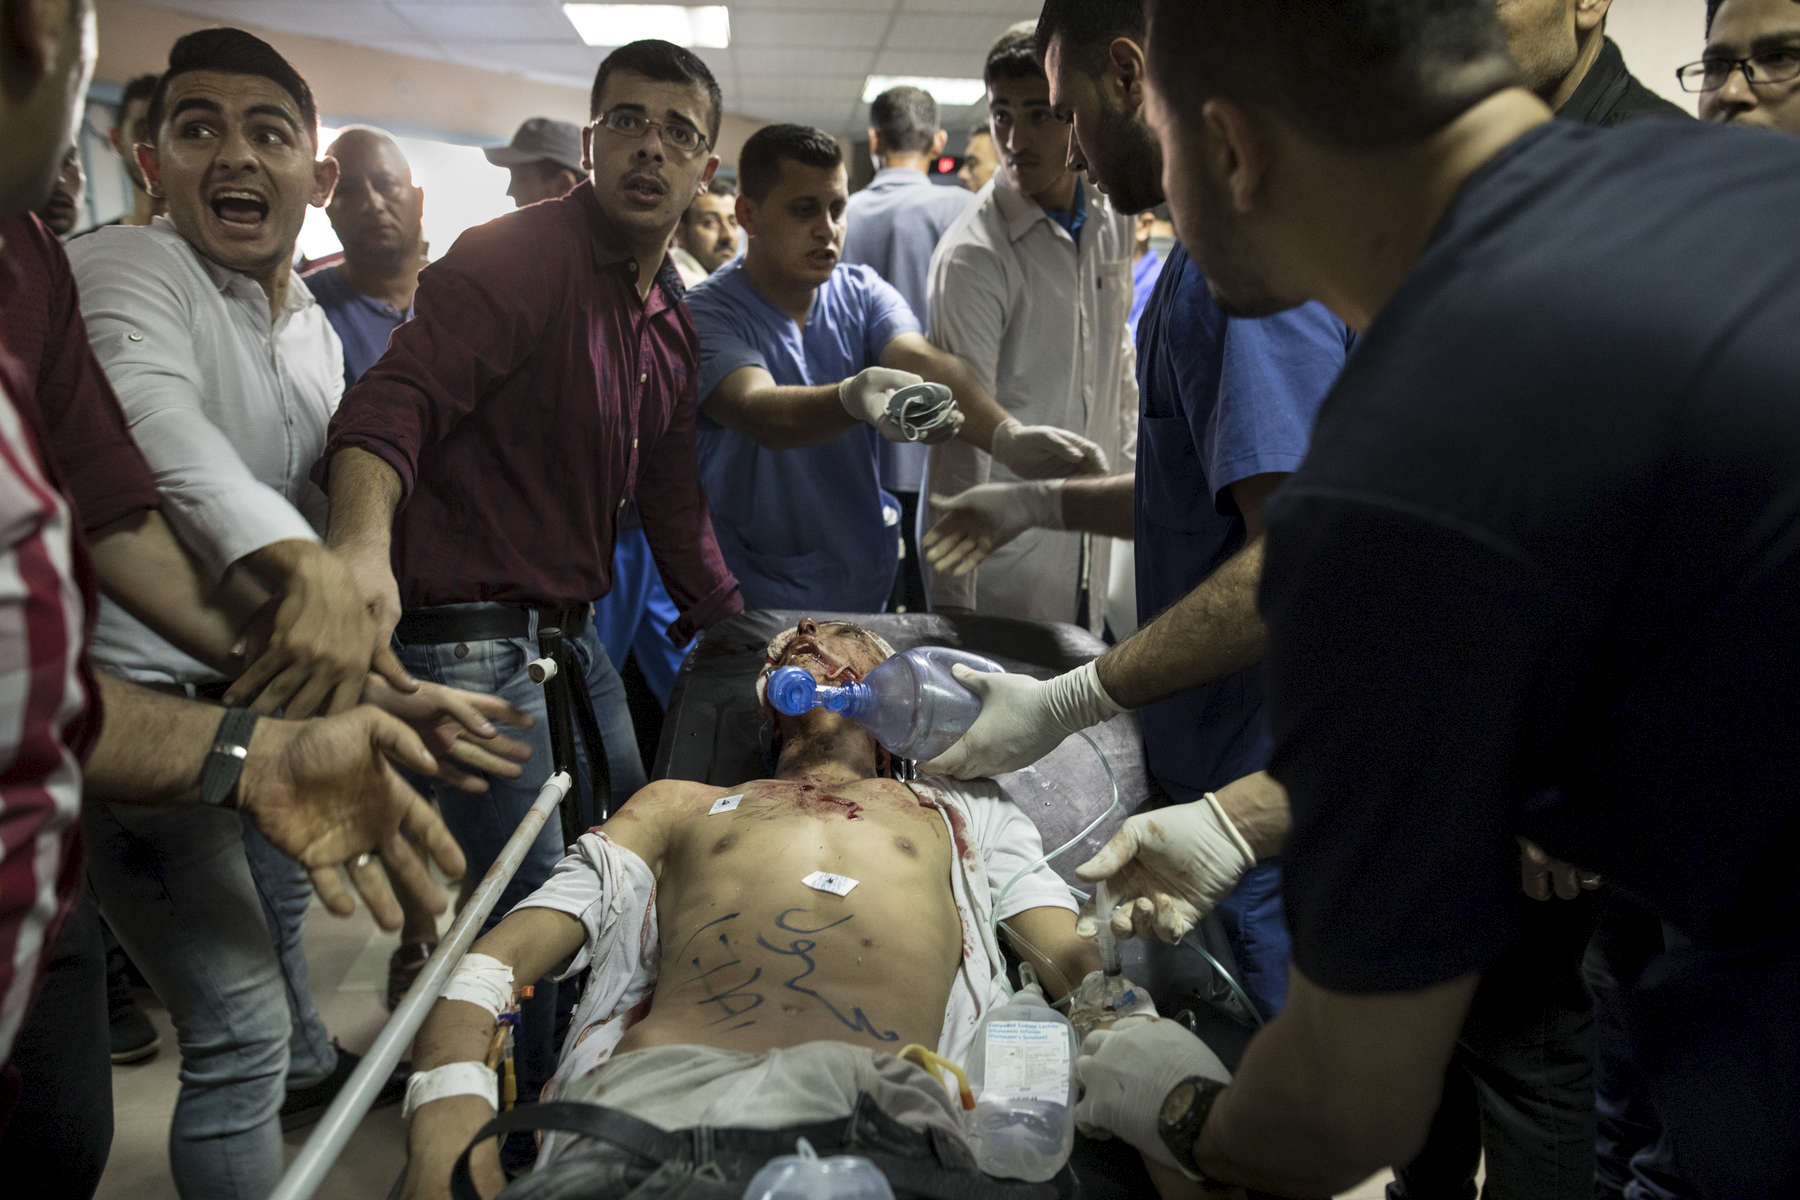 GAZA CITY, GAZA STRIP- MAY 14,2018:  A seriously injured male is seen being taken in for surgery at the emergency room at the Al Shifa hospital on May 14,2018 in Gaza city, Gaza strip. According to the International Committee of the Red Cross (ICRC), 13,000 Palestinians were wounded (as of June 19, 2018), the majority severely, with some 1,400 struck by three to five bullets. No Israelis were physically harmed during this time period, Israel's use of deadly force was condemned during the UN general assembly on June 13 th along with other human rights organizations. The Israeli military (IDF) started using new weaponry, explosive bullets that shatter bones, tissue, destroying veins and arteries, the aim is to create a handicapped community, especially amongst the young male population. Many of the wounded protesters have to undergo multiple surgeries to try to save their limbs, and in some cases amputation is the only solution. With limited healthcare available in Gaza many were sent to Jordan and Turkey for further treatment. More issues that plague Gaza include a water supply that is 95 percent contaminated and a population forced to live without electricity for 21 hours a day. Gaza is compared to Venezuela with almost half of it’s labor force unemployed. Everyone is well aware that Gaza's two million inhabitants are trapped in a cycle of violence and poverty, living in an open air prison. The problems and complications affecting Gaza today are overwhelming. The world, seemingly accustomed to the suffering of the Gazan people turns a blind eye. (Photo by Paula Bronstein ) 